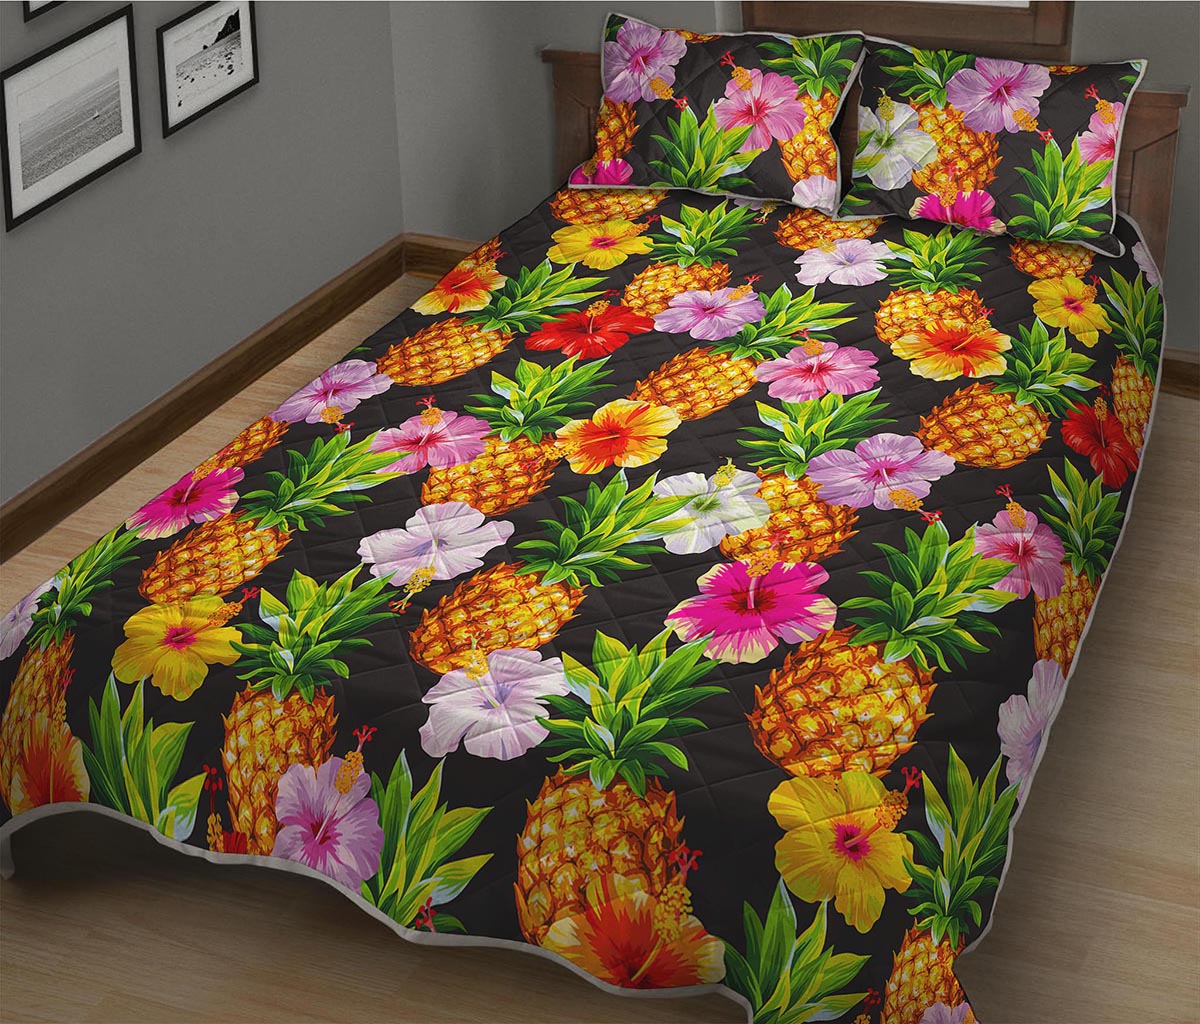 Aloha Hibiscus Pineapple Pattern Print Quilt Bed Set